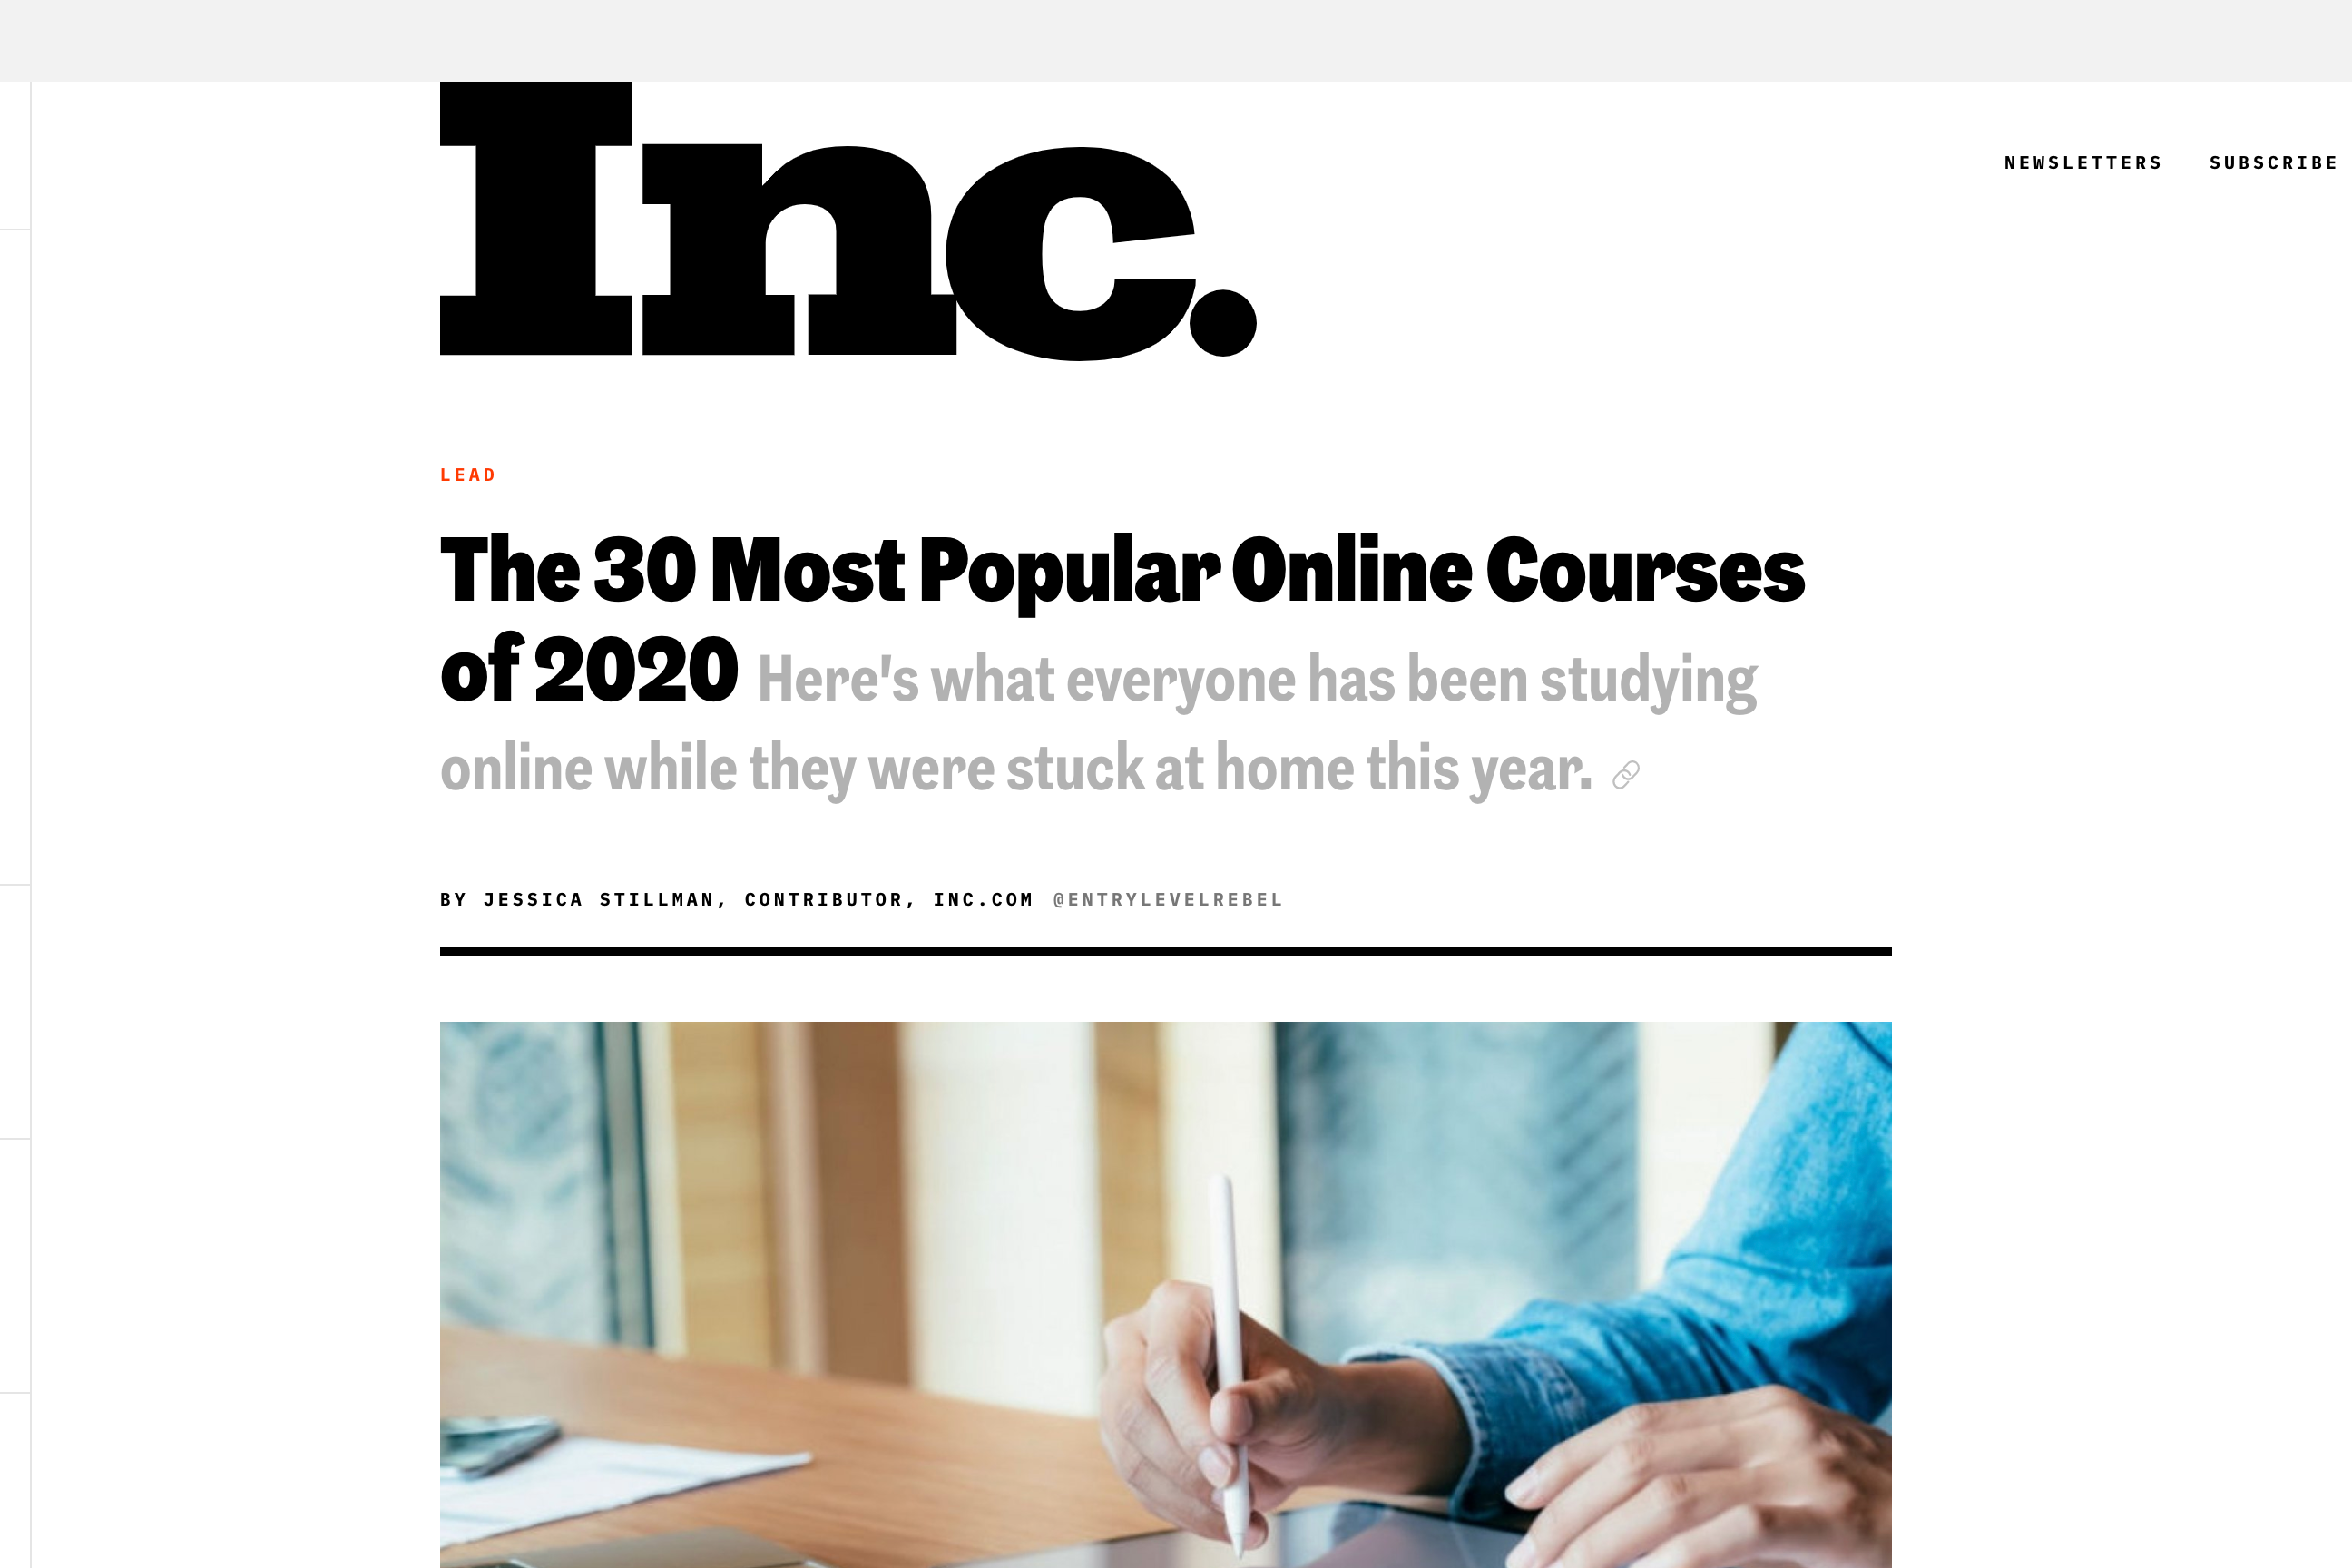 The 30 Most Popular Online Courses of 2020